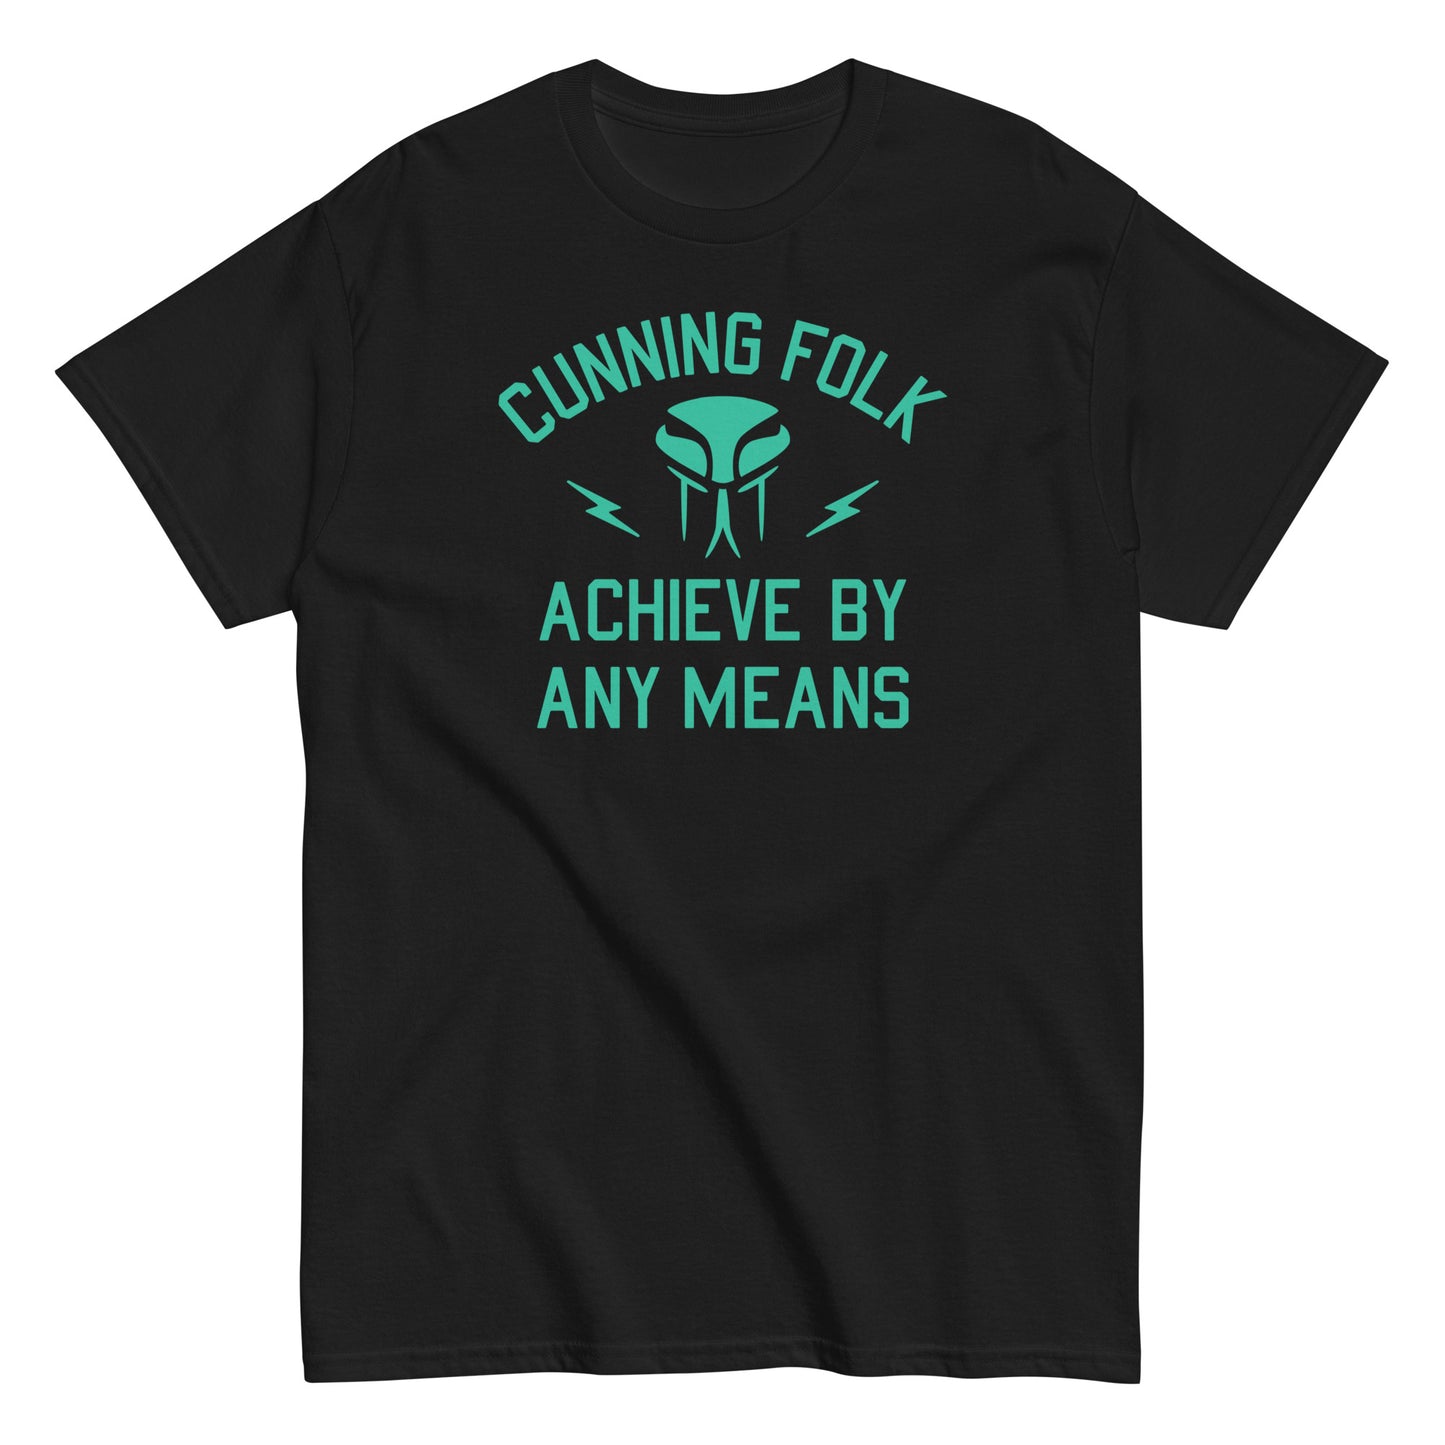 Cunning Folk Achieve By Any Means Men's Classic Tee